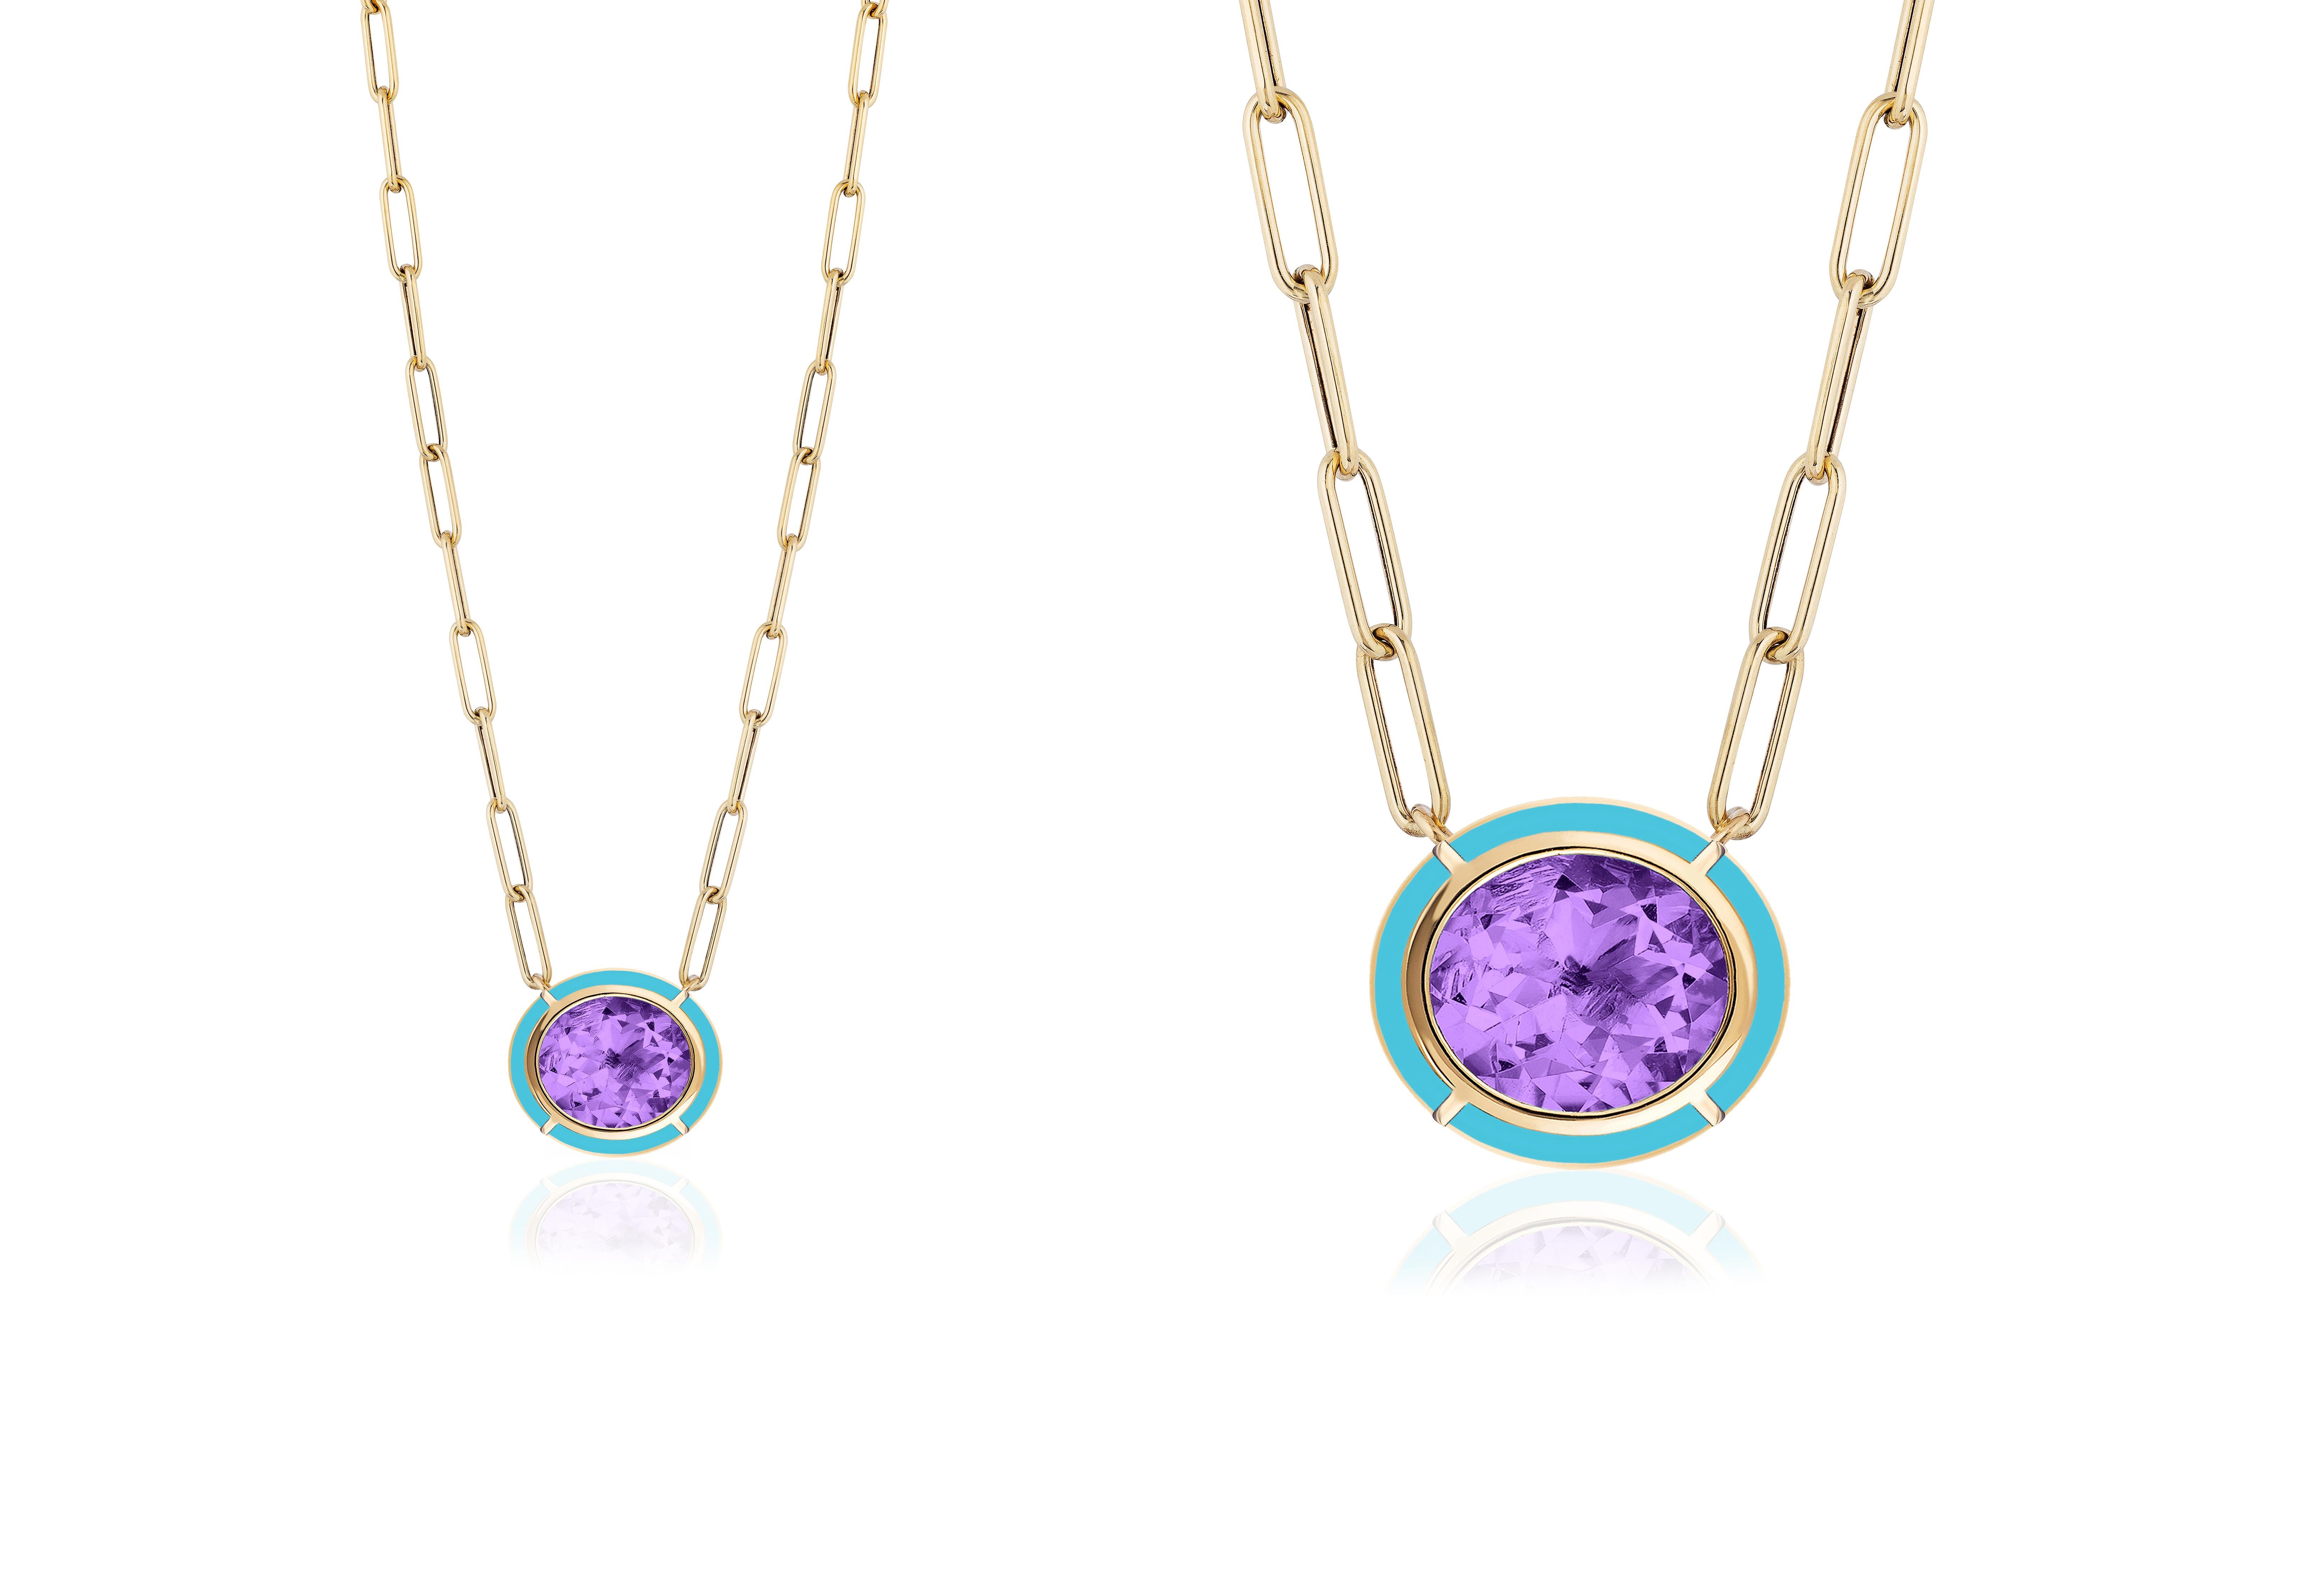 This Amethyst & Turquoise Inlay Oval Pendant in 18K Yellow Gold is a stunning piece of jewelry from the 'Mélange' Collection. The pendant features an oval-shaped Amethyst surrounded by a Turquoise stone, both set in 18K Yellow gold. The combination